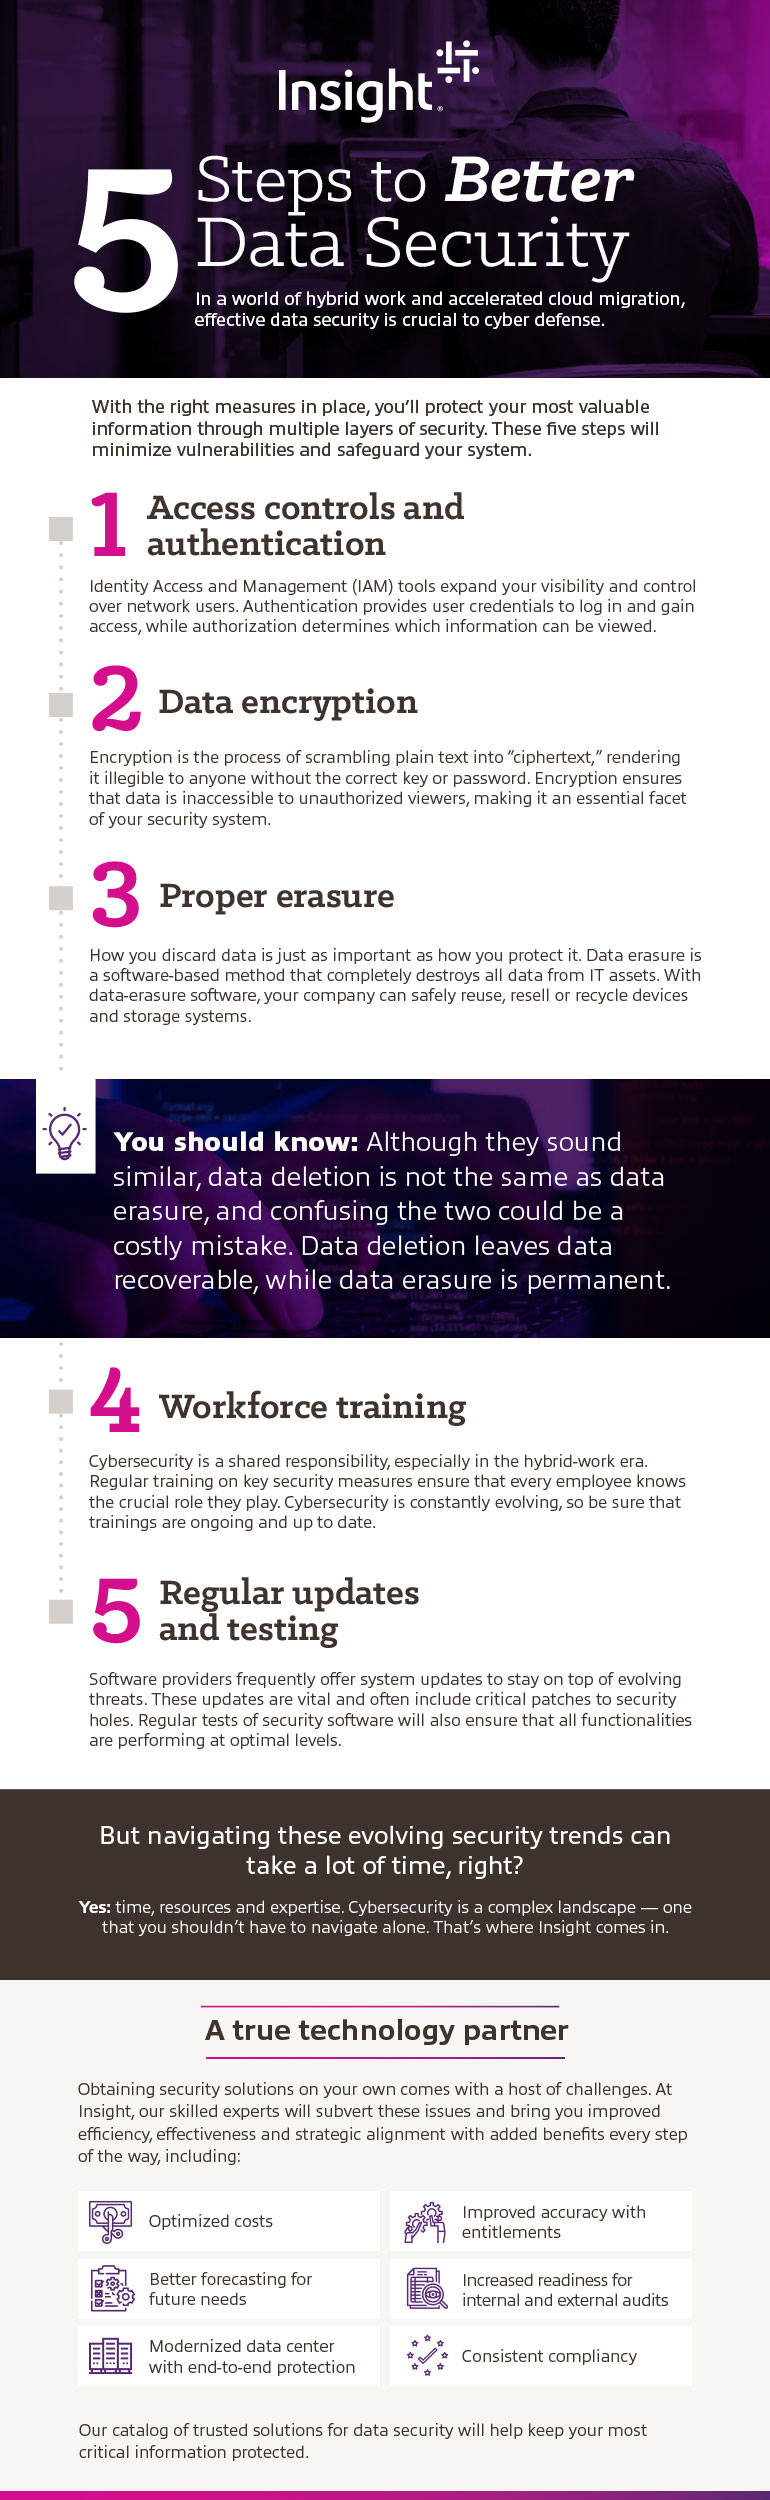 5 Steps to Better Data Security infographic as transcribed below